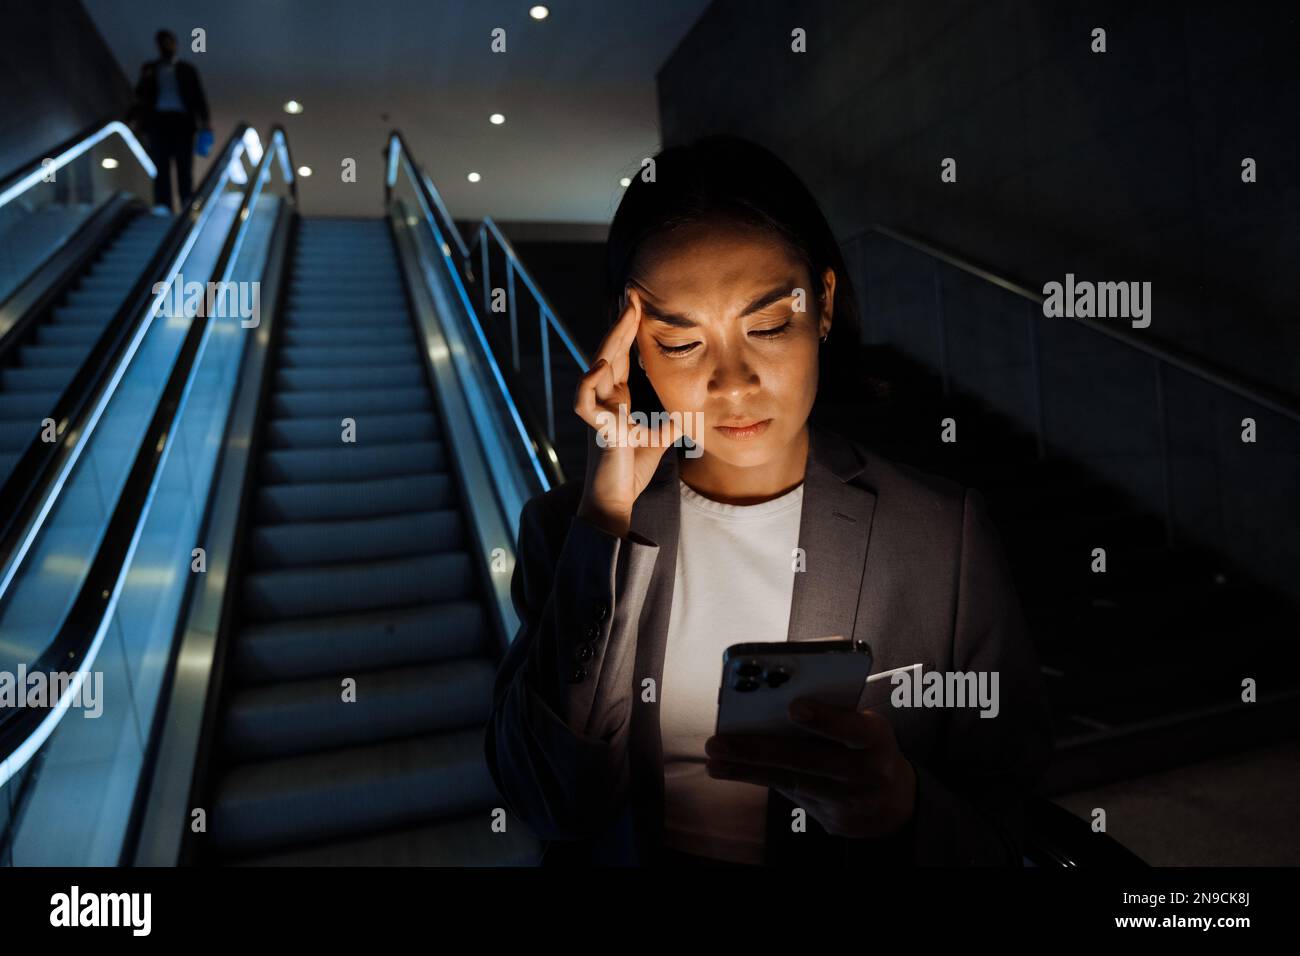 Young displeased asian woman wearing suit frowning while using smartphone standing on escalator indoors Stock Photo